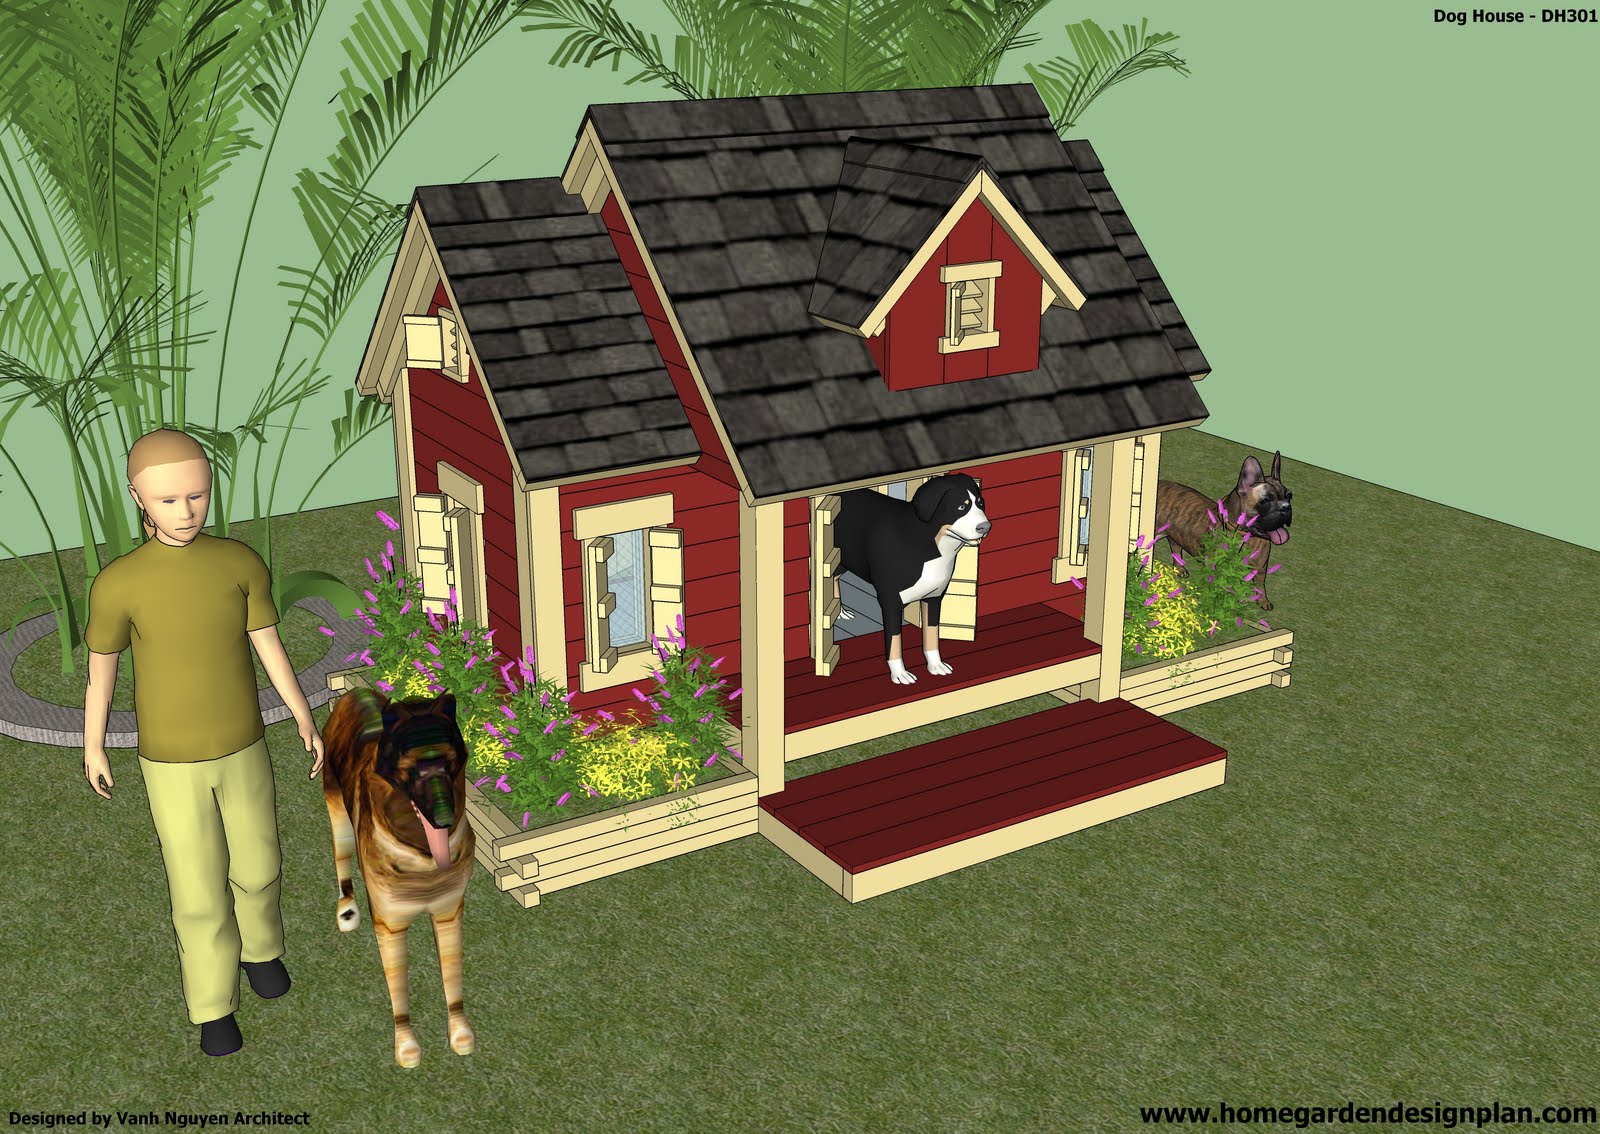 insulated+dog+house+plans+dog+house+plans+free.jpg